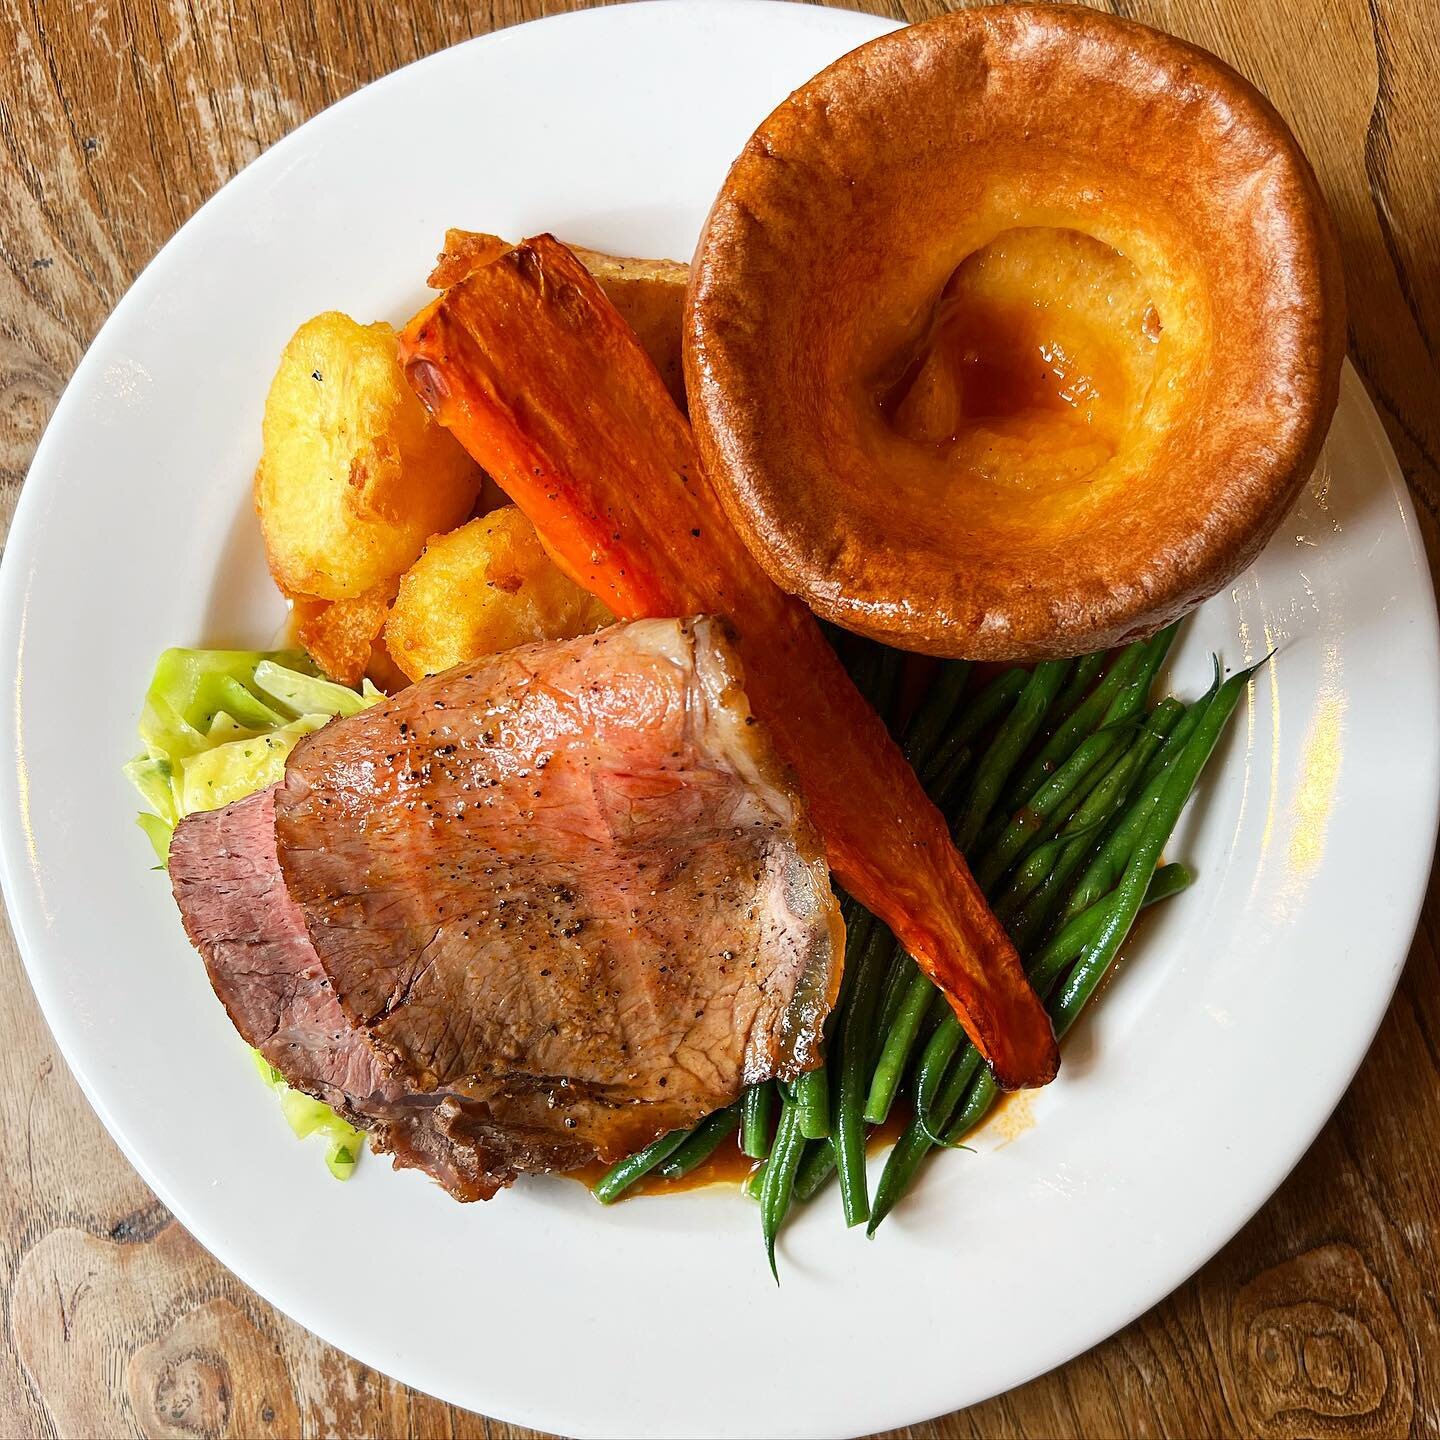 Sunday is just around the corner, which means it&rsquo;s time to indulge in a delicious roast 😋 book your table by giving us a call or via our website 🥂 

#sundayroast #kensalrise #queenspark #thechamberlayne